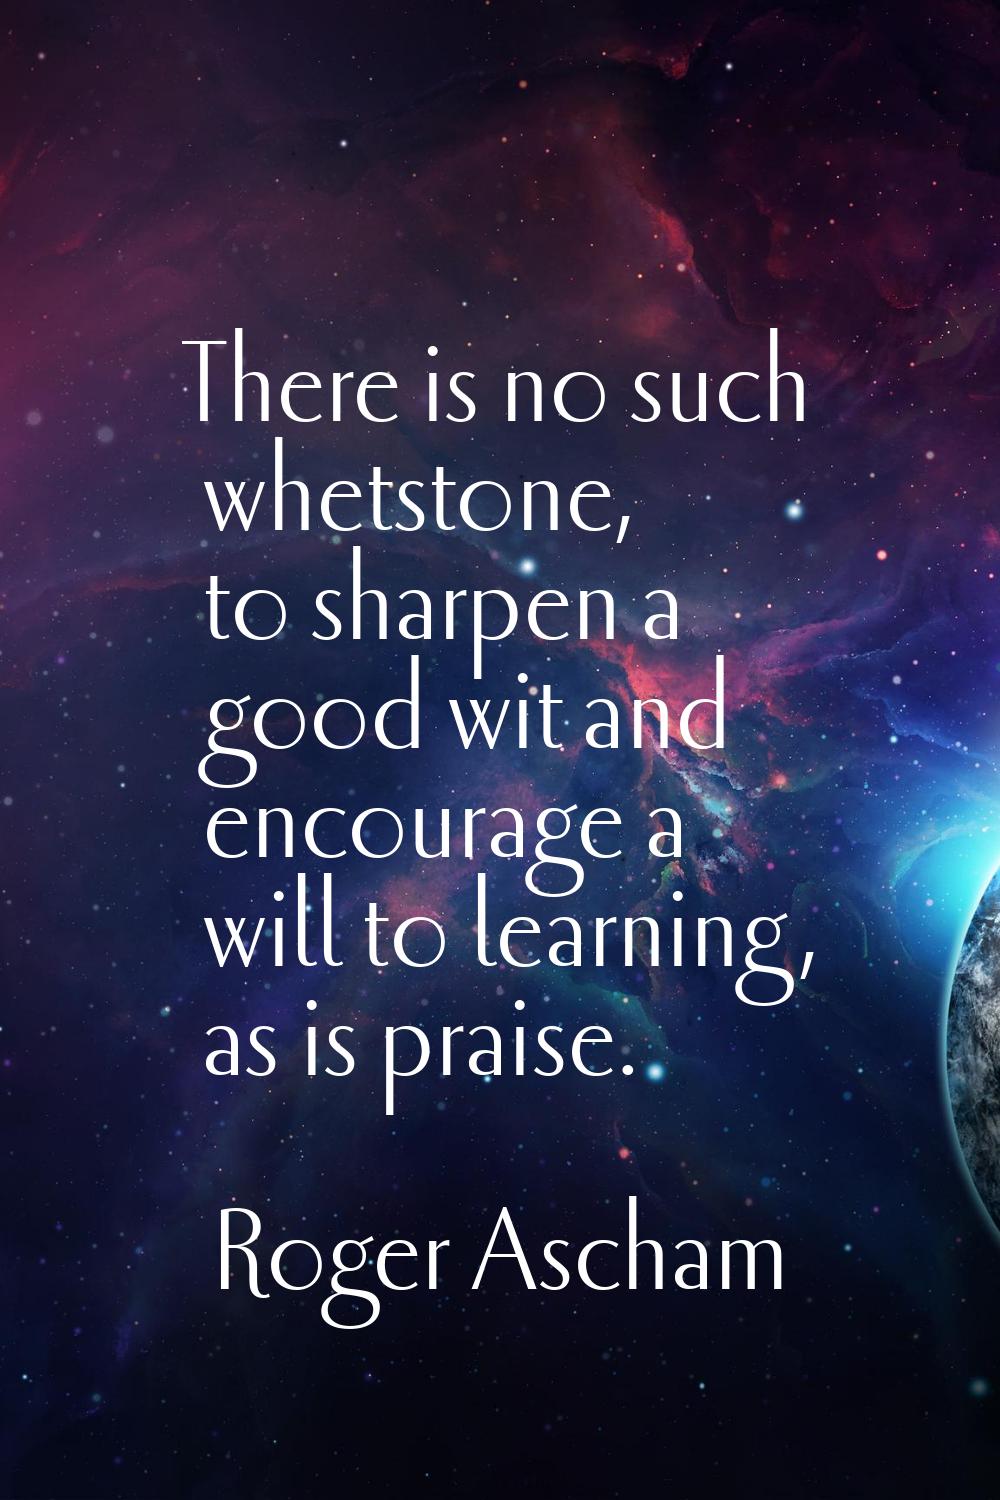 There is no such whetstone, to sharpen a good wit and encourage a will to learning, as is praise.